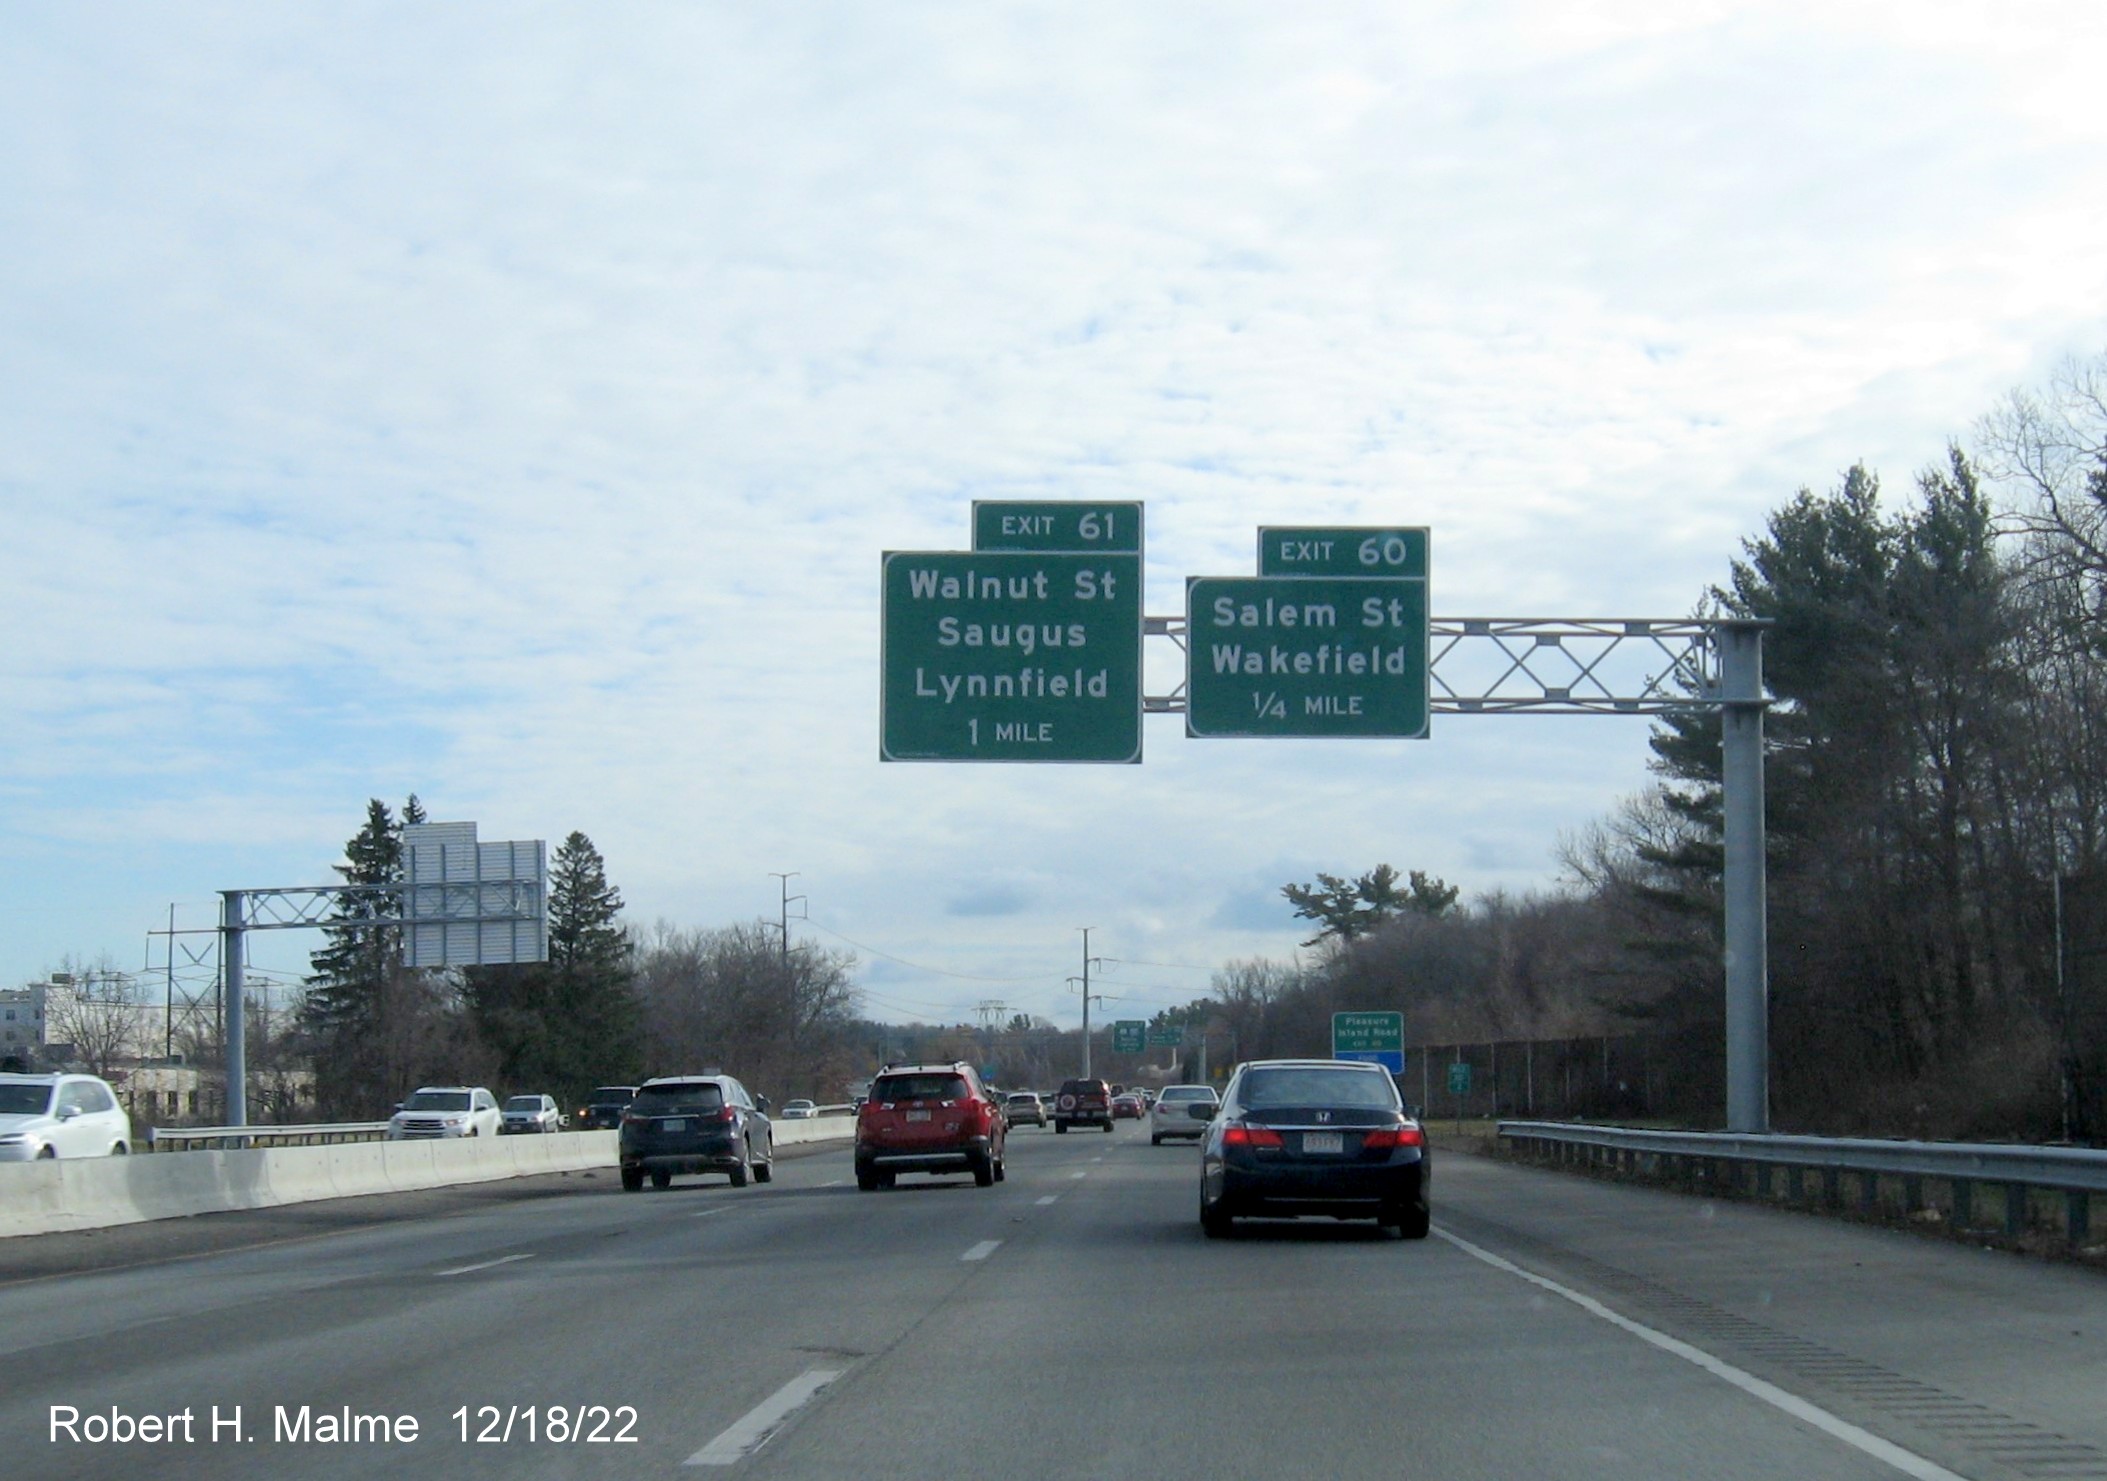 Image of newly placed overhead advance signage for Walnut Street and Salem Street exit on I-95/MA 128 North in Wakefield, December 2022